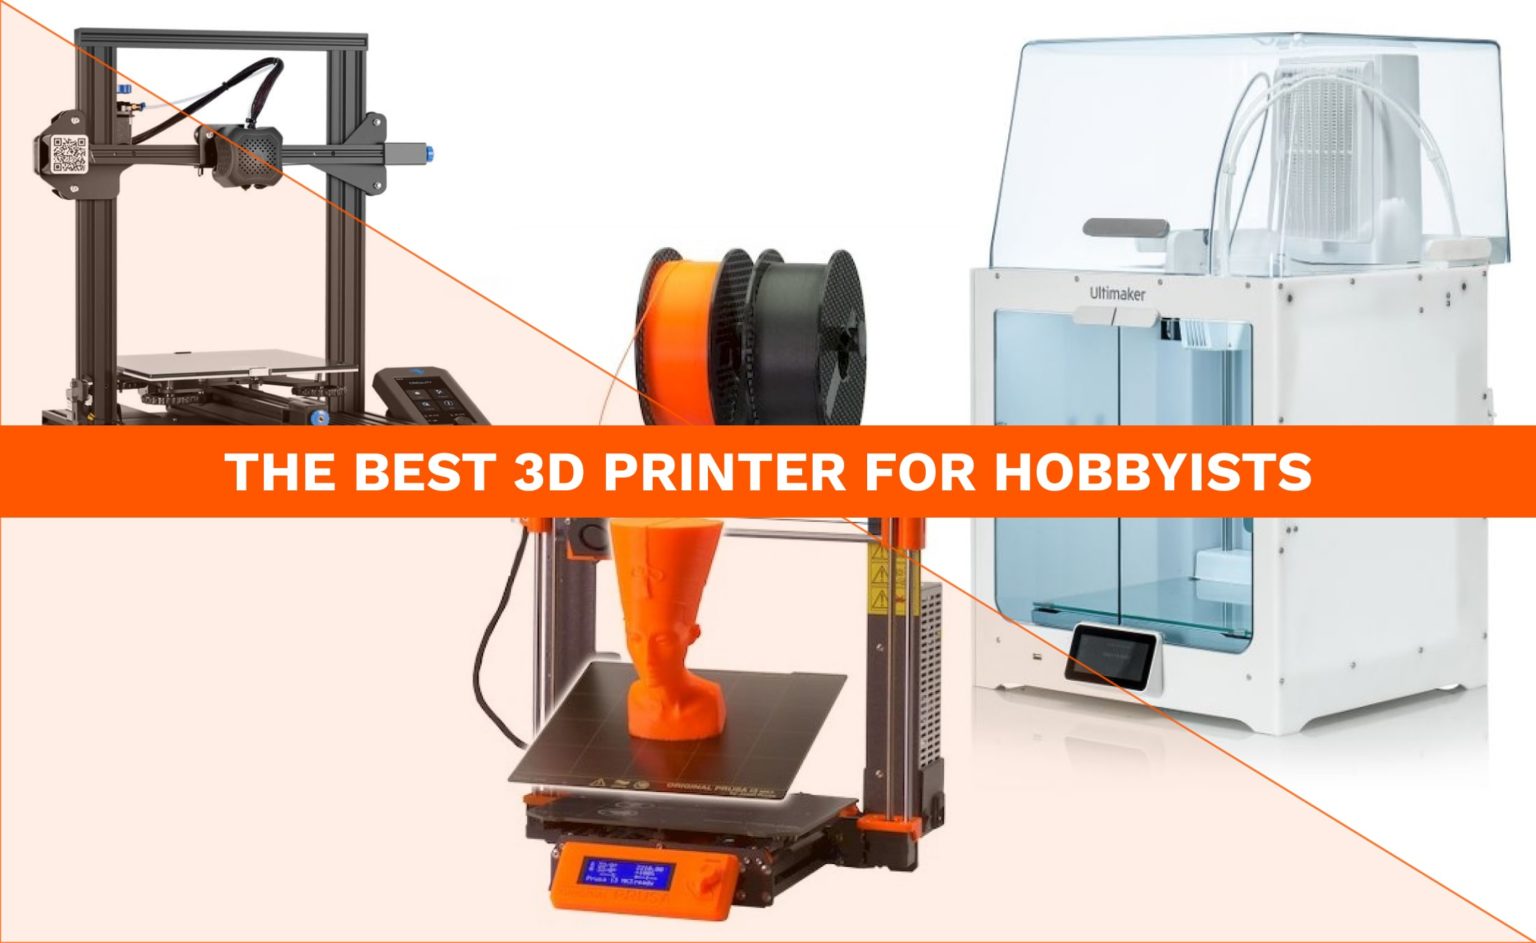 The best 3D printer for Hobbyists